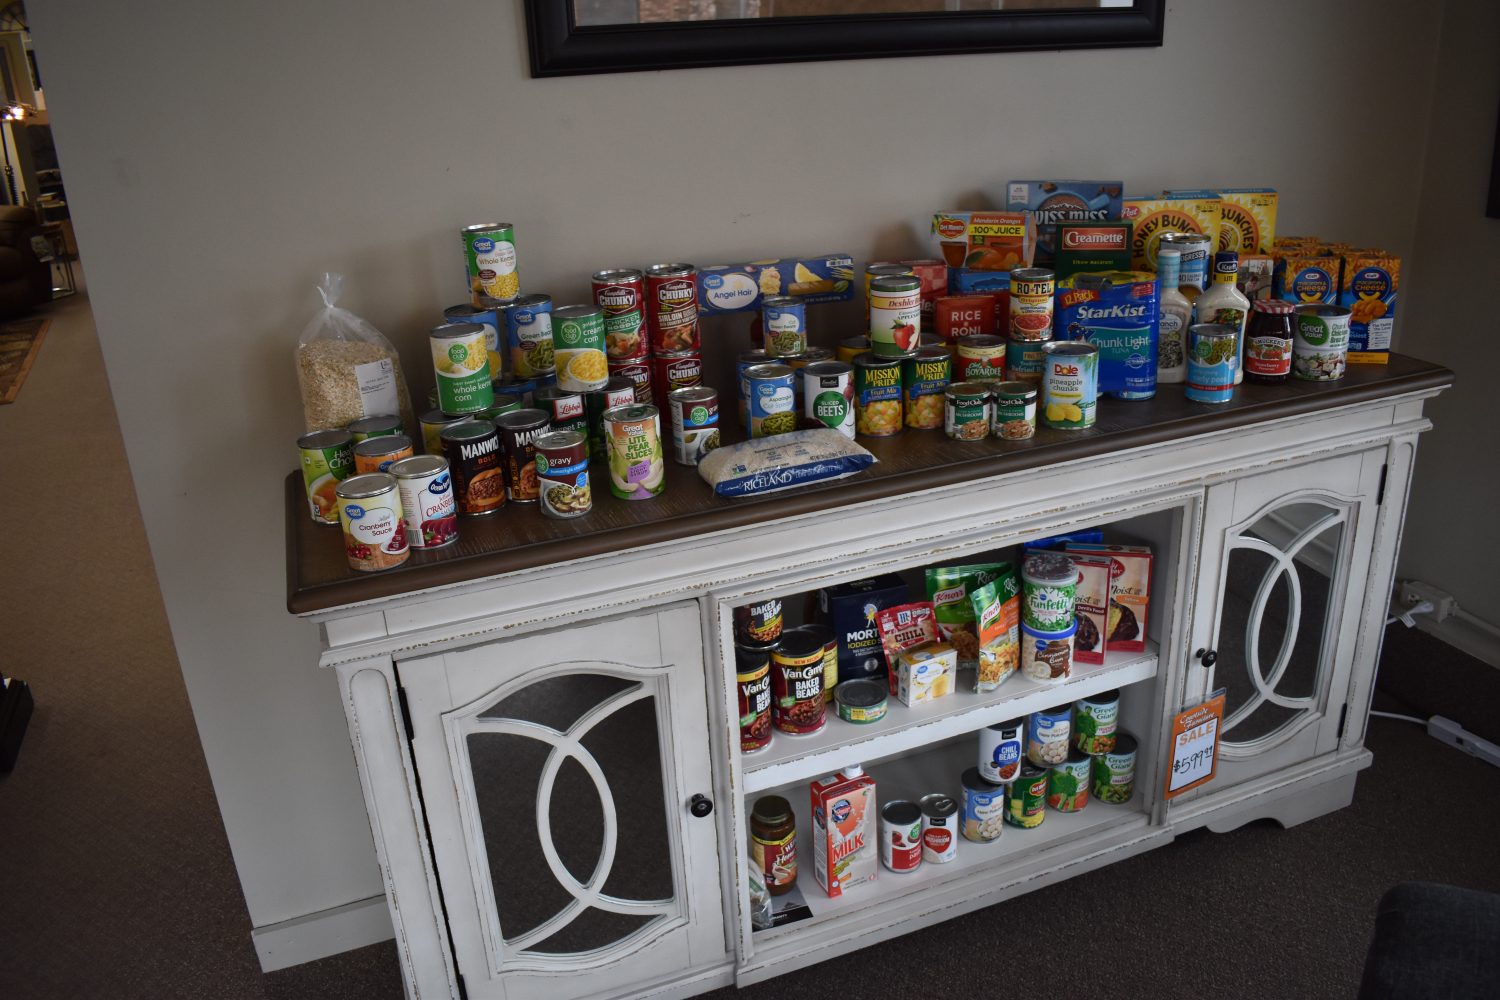 Courtside Furniture collects donations for food pantry